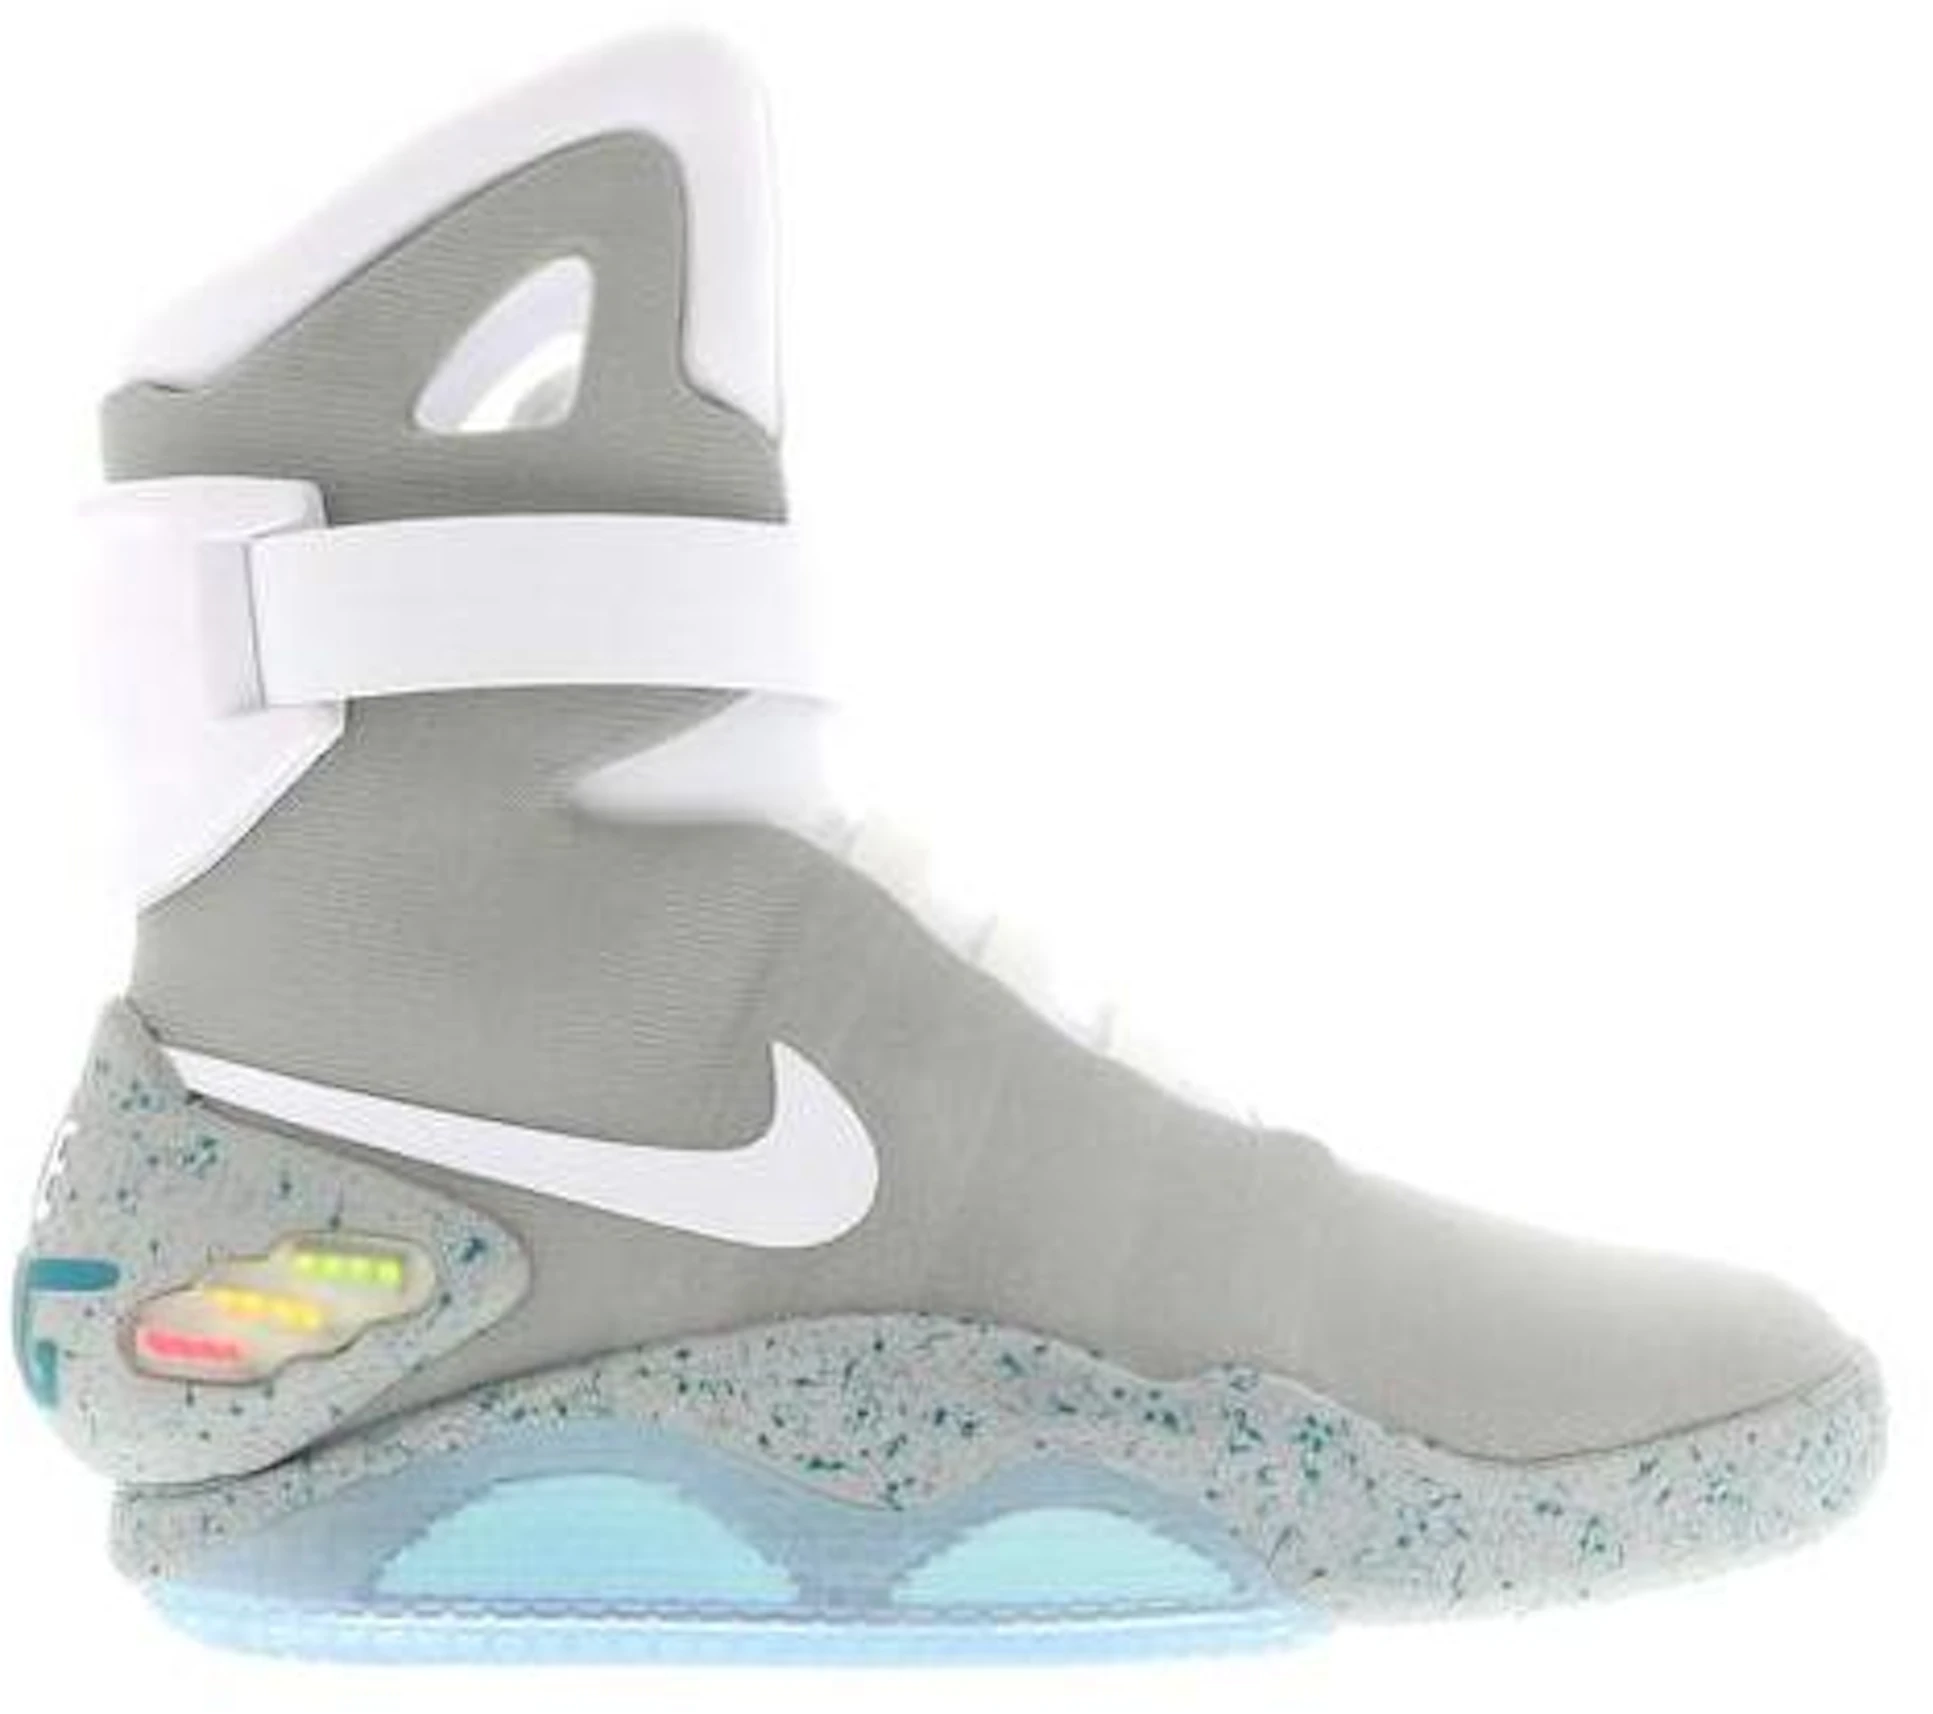 Vooruitgang procent Geneigd zijn Nike MAG Back to the Future (2016) - HO15MNOTHR402625849 - US